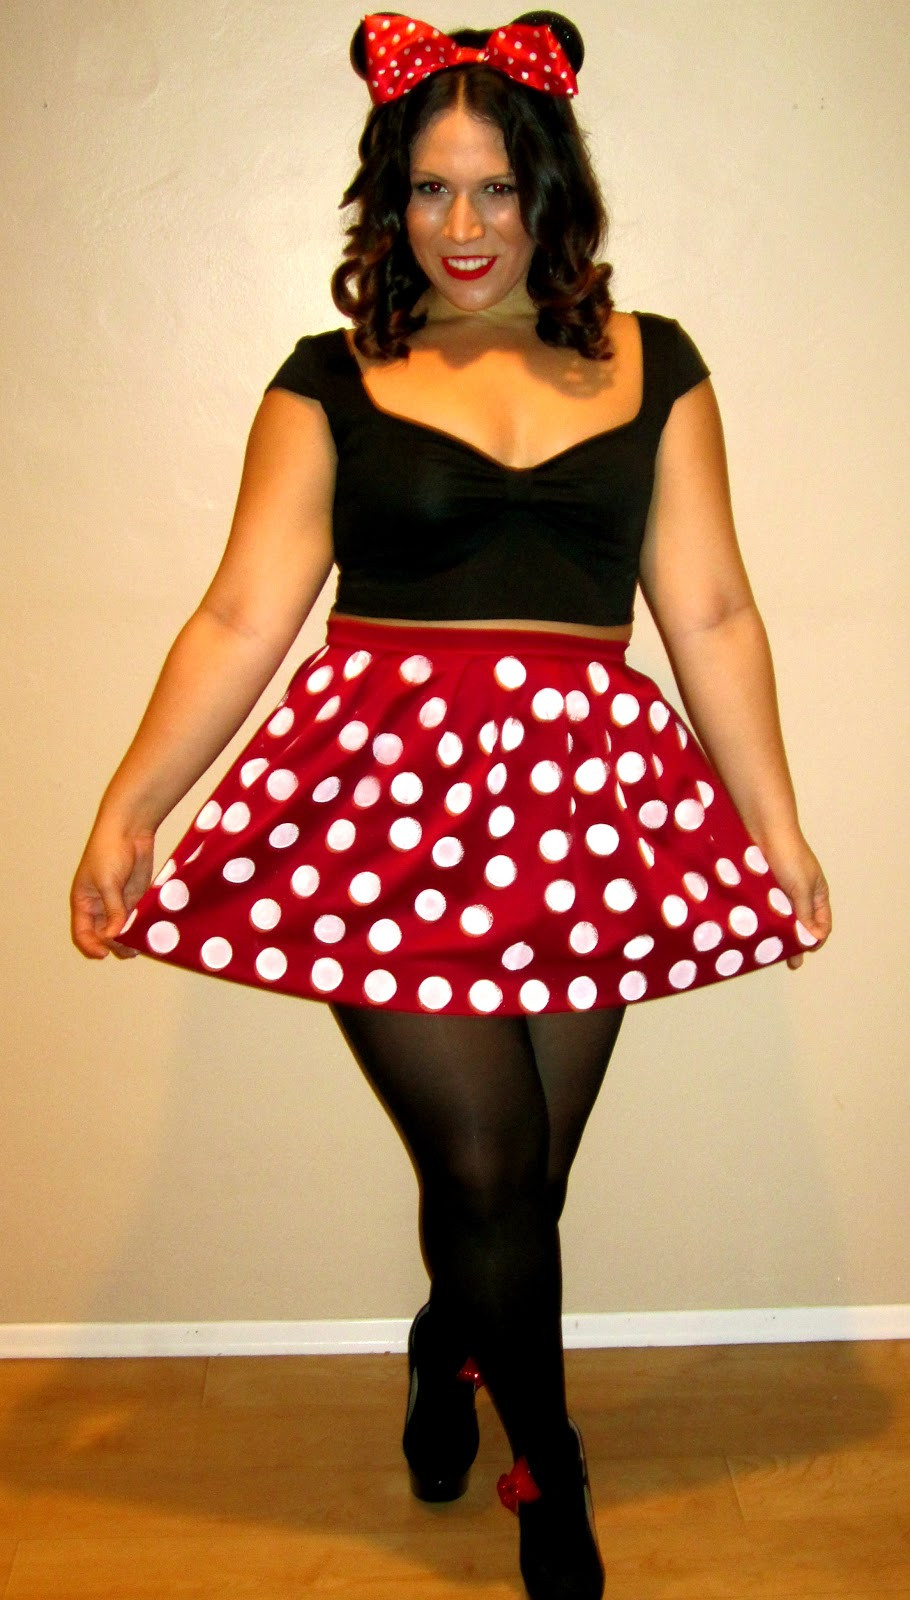 DIY Adult Minnie Mouse Costume
 So Happy I Could DIY Disney Darling